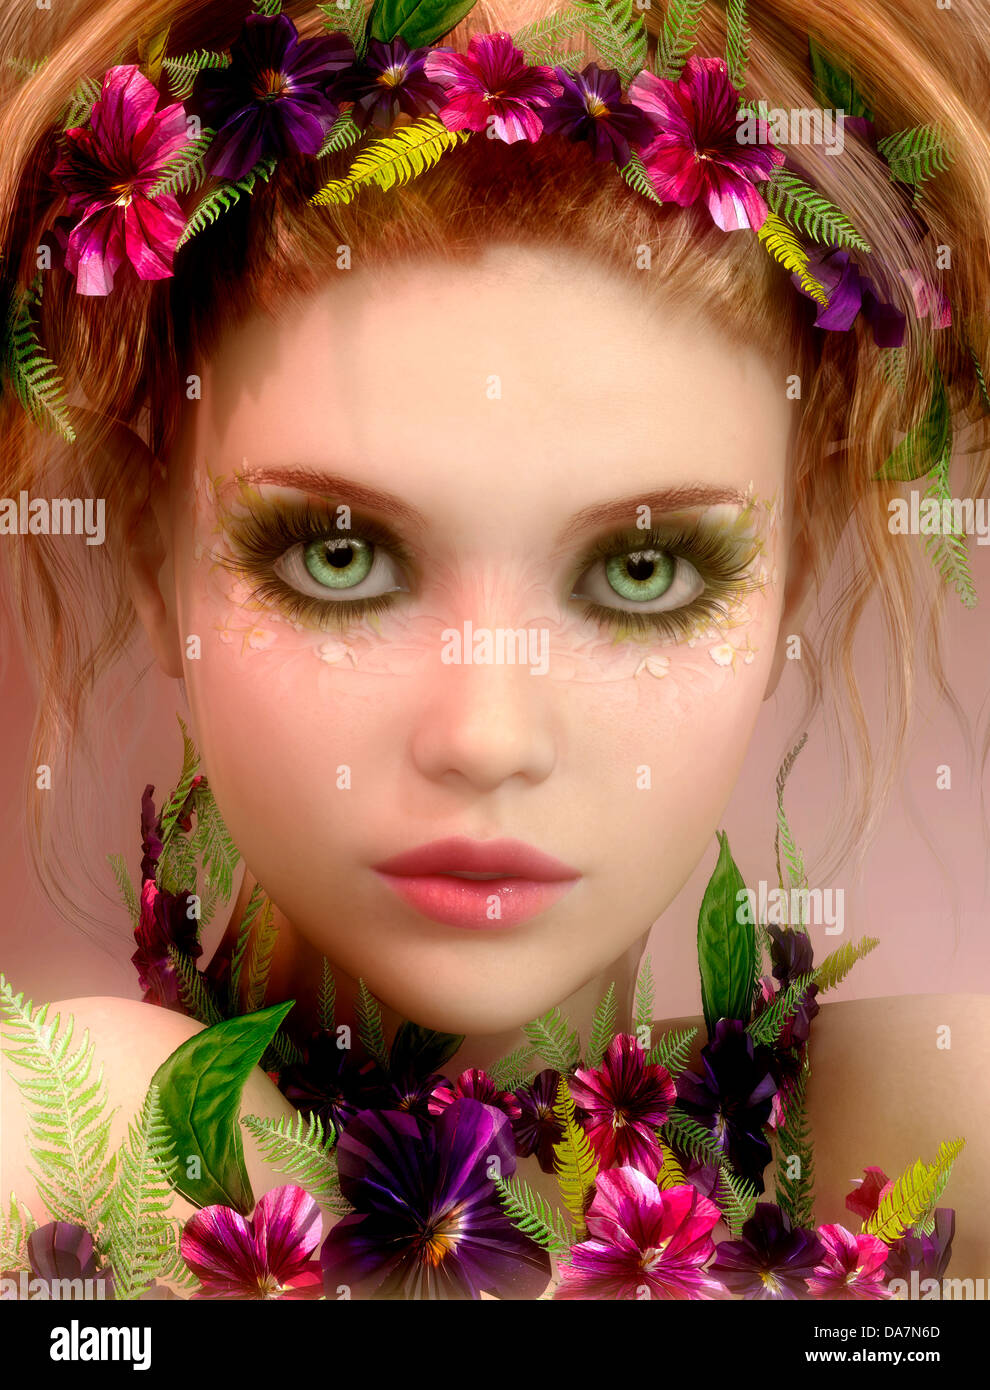 3d computer graphics of a Girl with colored flowers Stock Photo